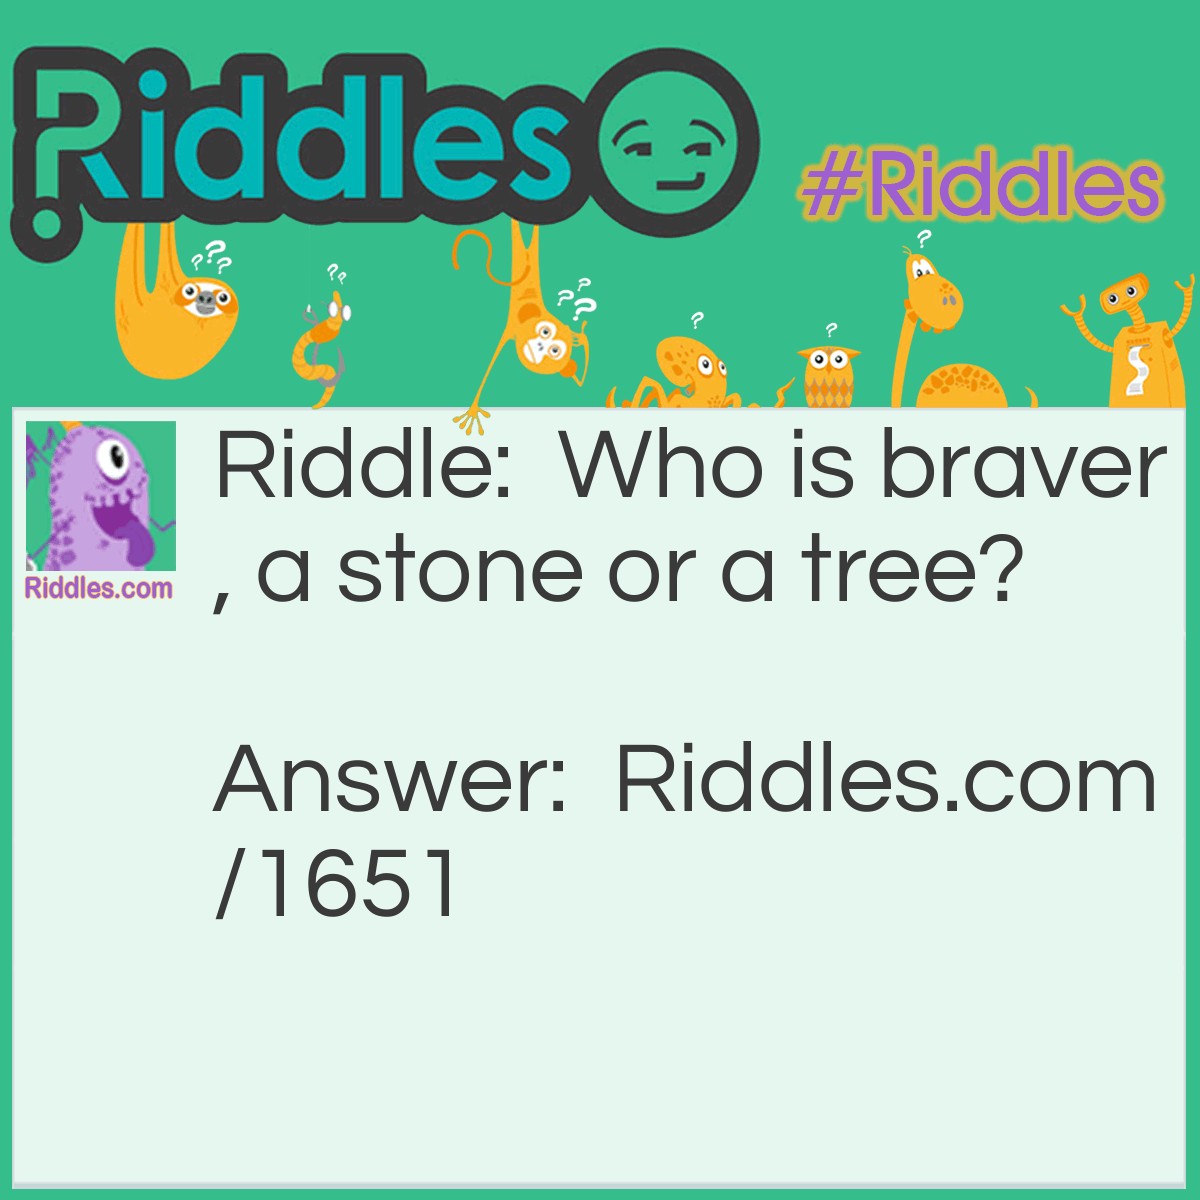 Riddle: Who is braver, a stone or a tree? Answer: The stone, because it's a little boulder.